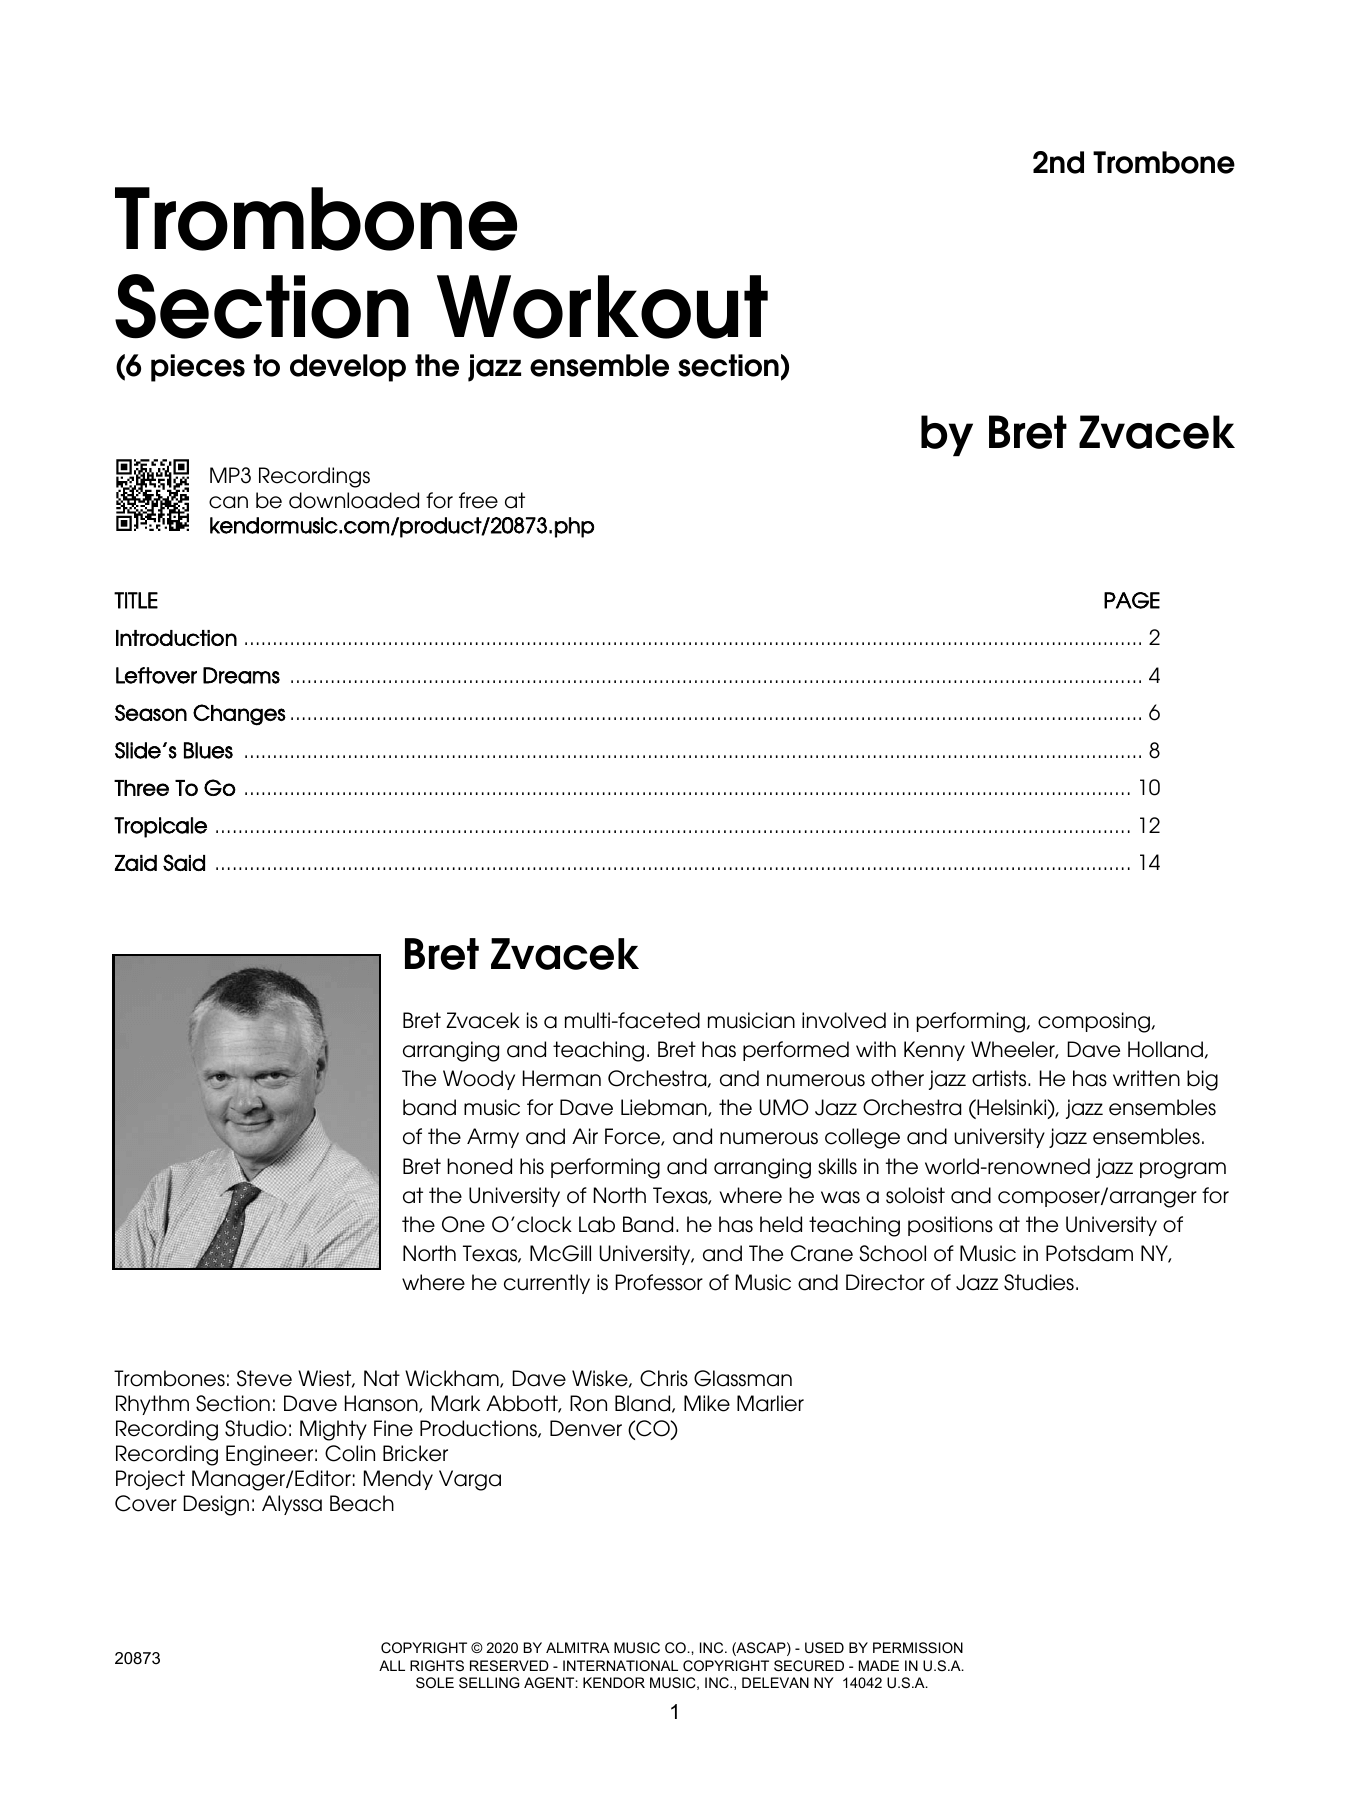 Trombone Section Workout with MP3's (6 pieces to develop the jazz ensemble section) - 2nd Trombone (Brass Ensemble) von Bret Zvacek